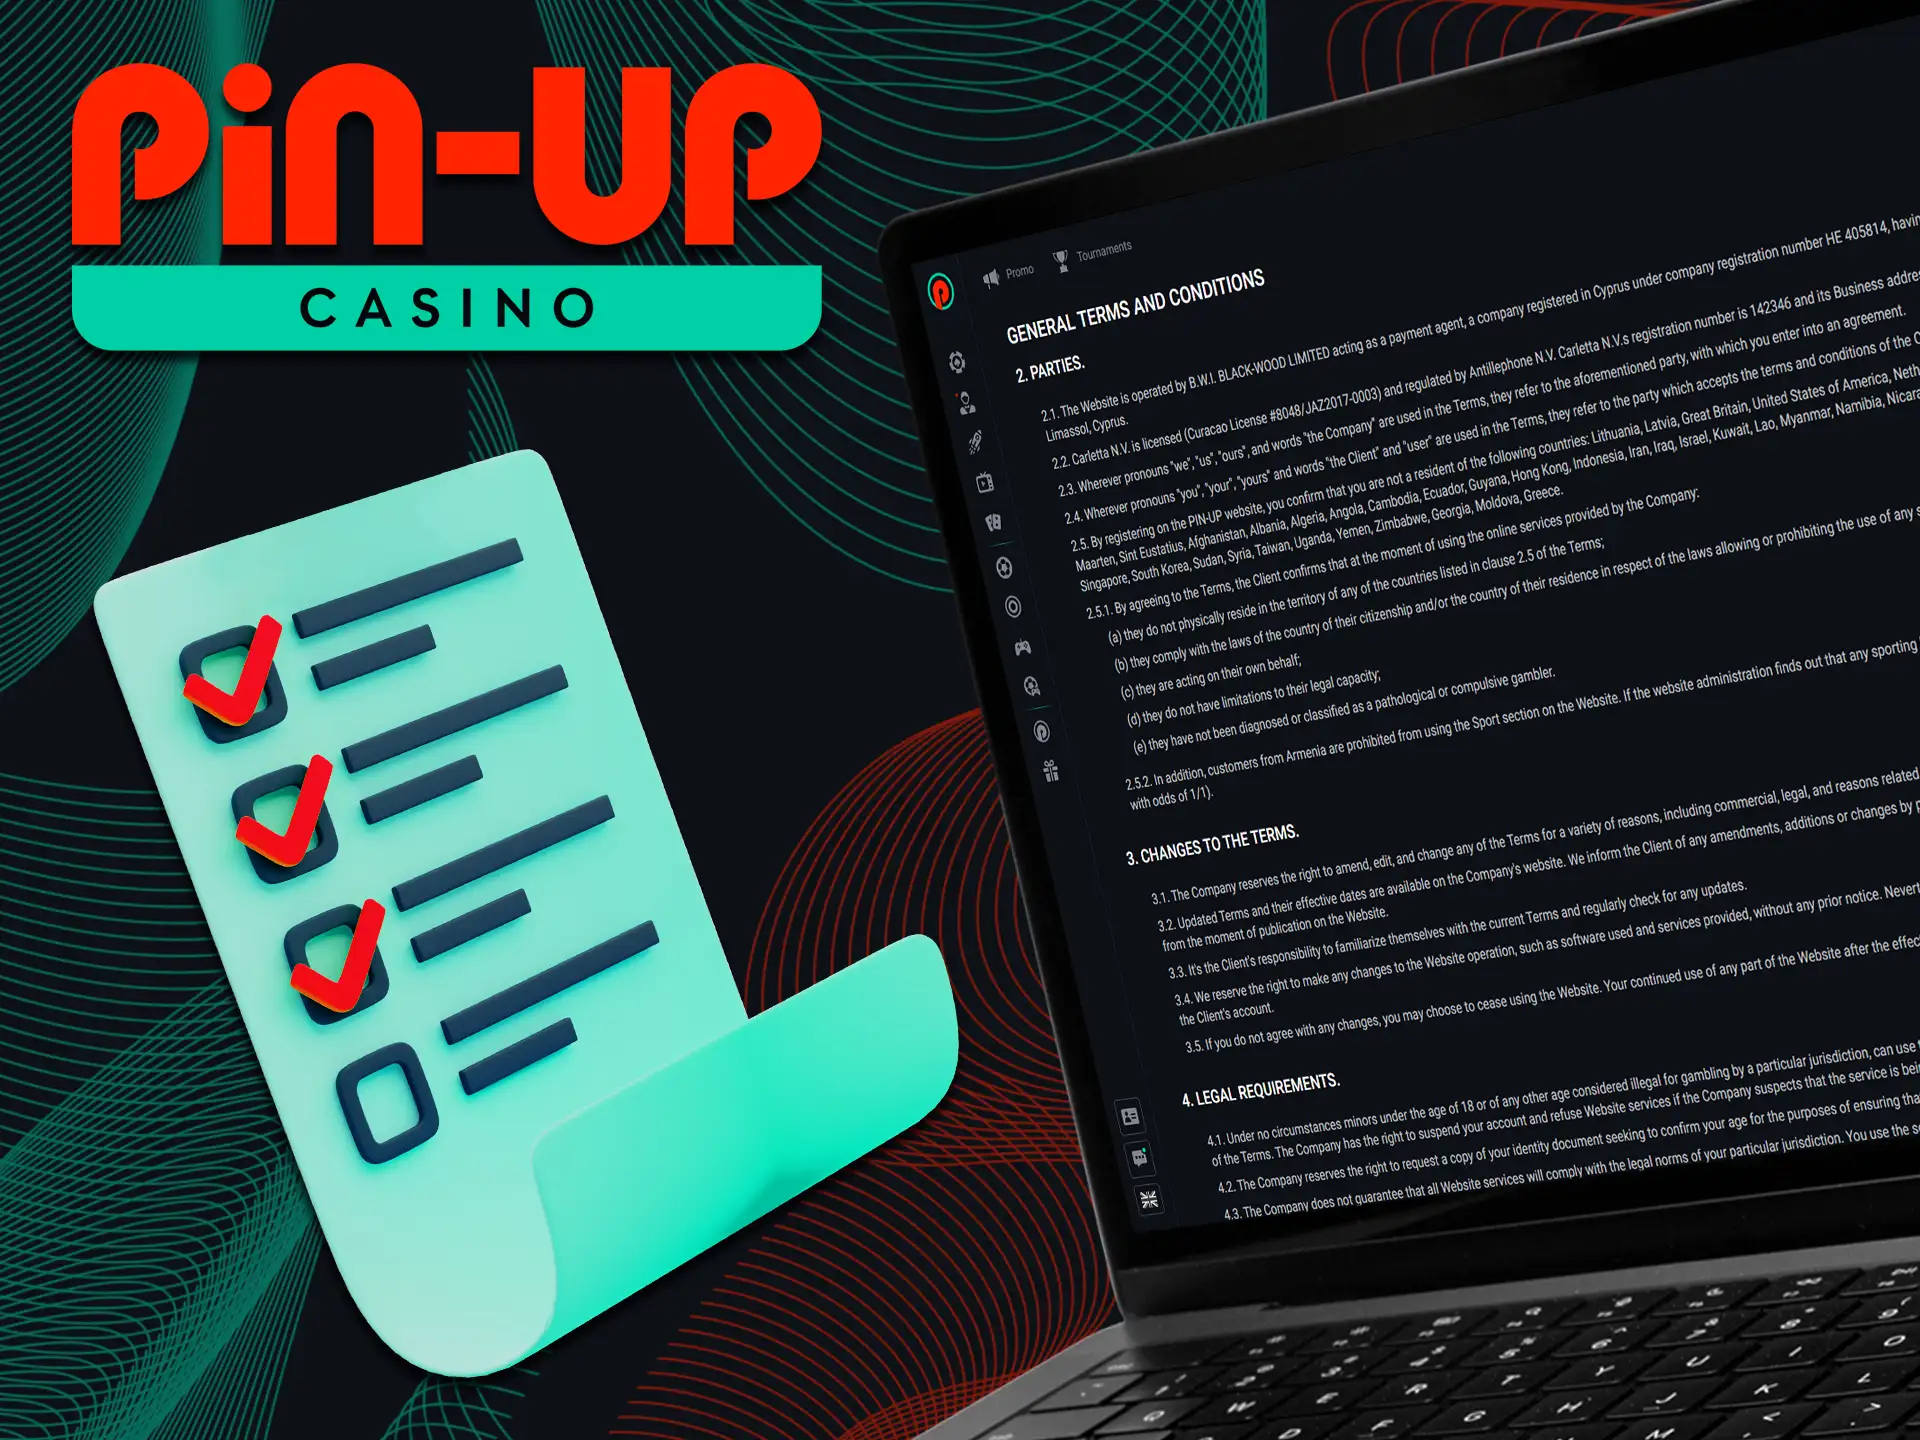 Pin-Up Casino assures players of a safe and fair environment.